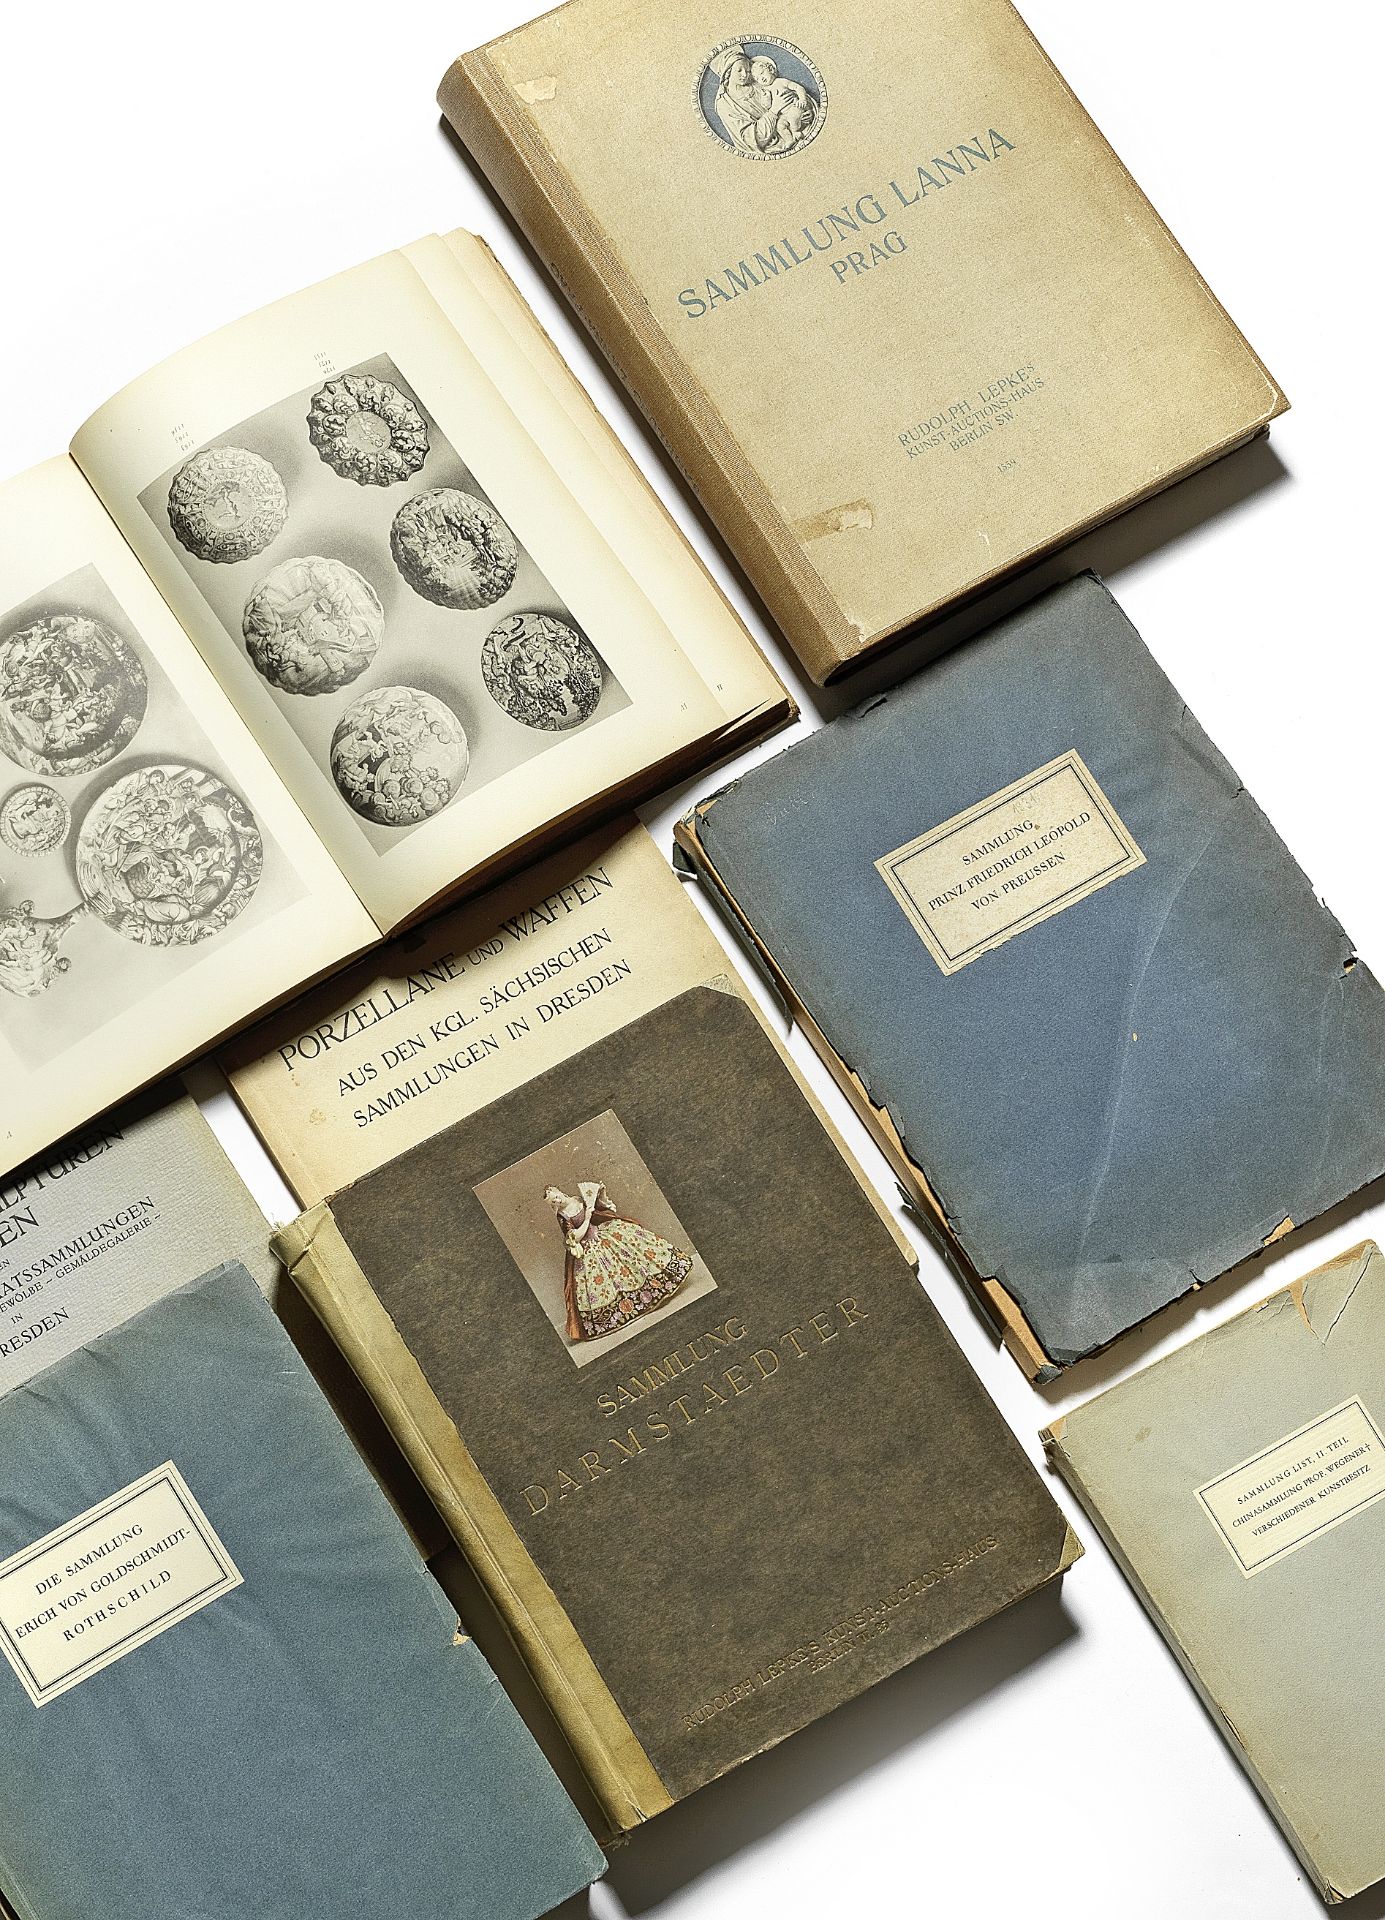 A collection of rare pre-war books and sale catalogues and a facsimile edition of the Schulz Codex